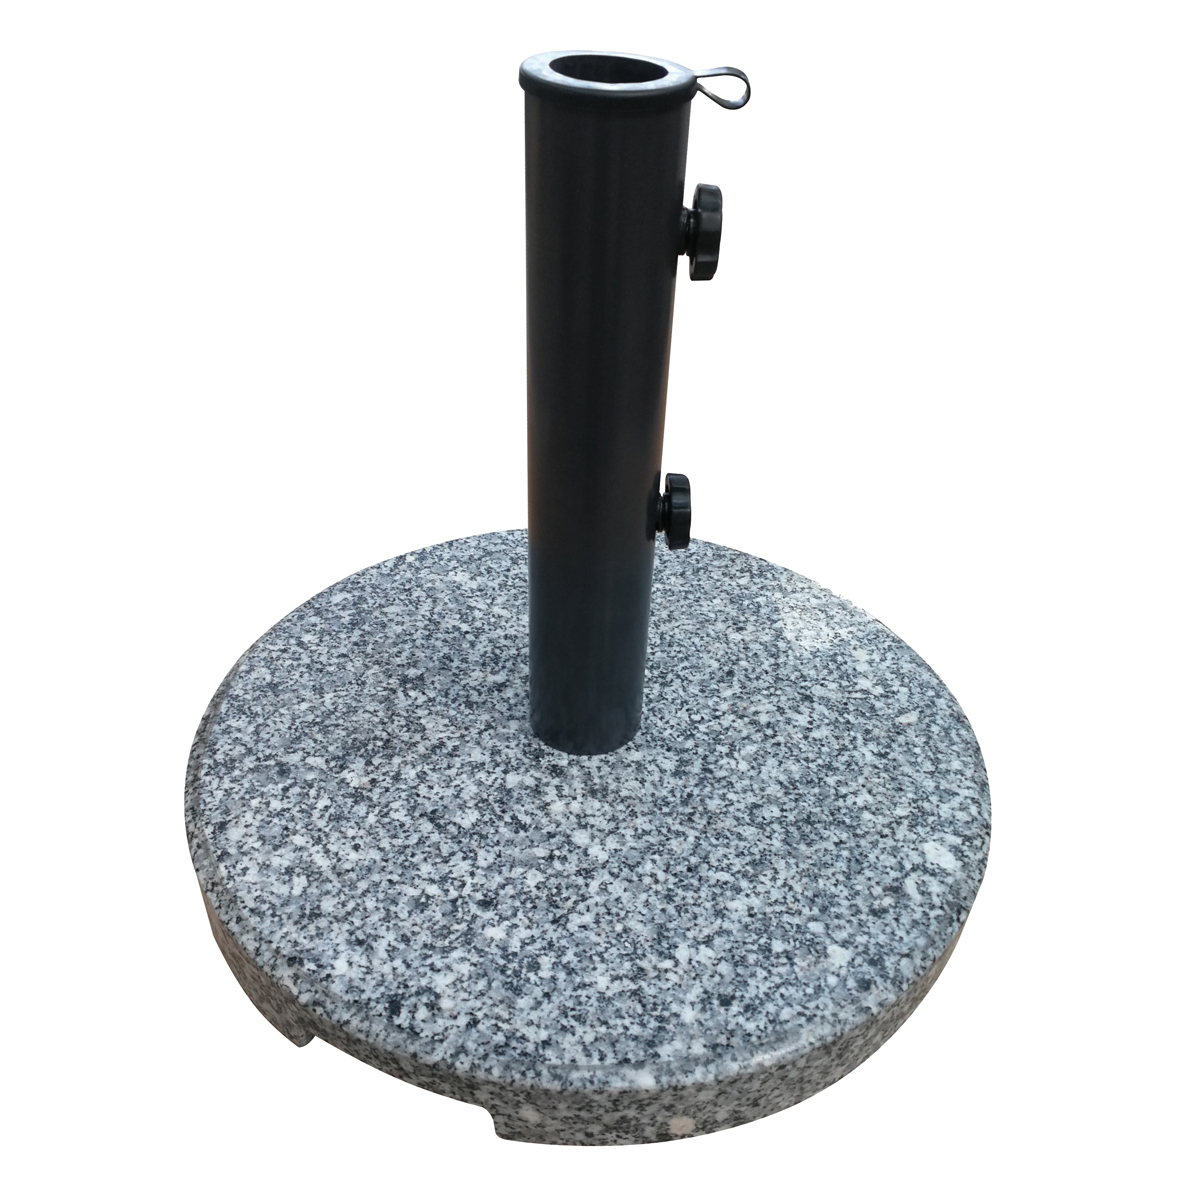 59657 Umbrella Base, 15.7 in Dia, 13.7 in H, Round, Stone, Steel and Plastic, Gray and Black